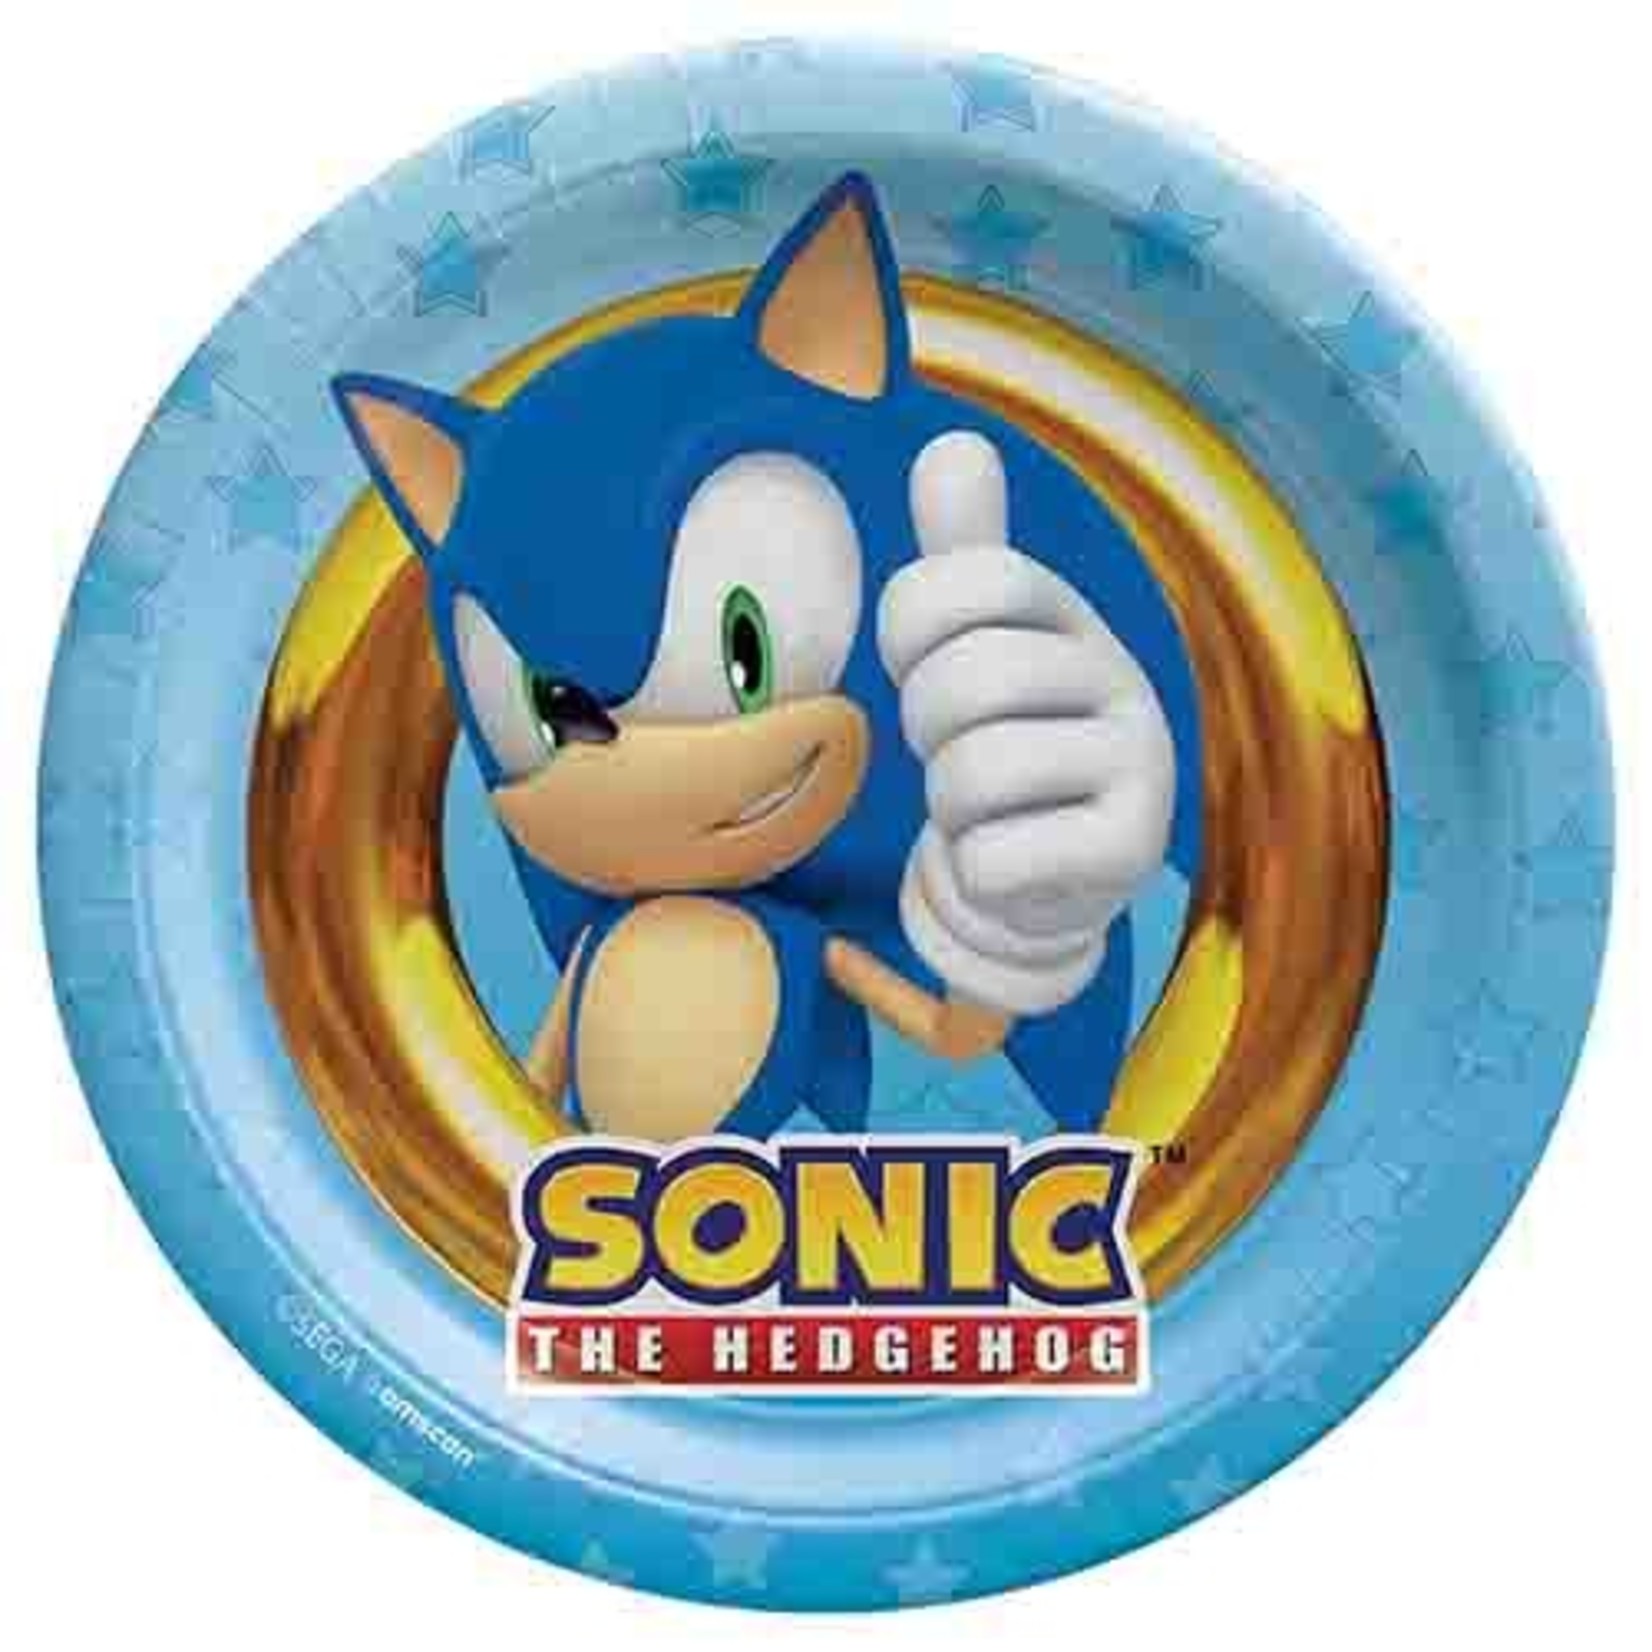 Amscan 7" Sonic The Hedgehog Plates - 8ct.